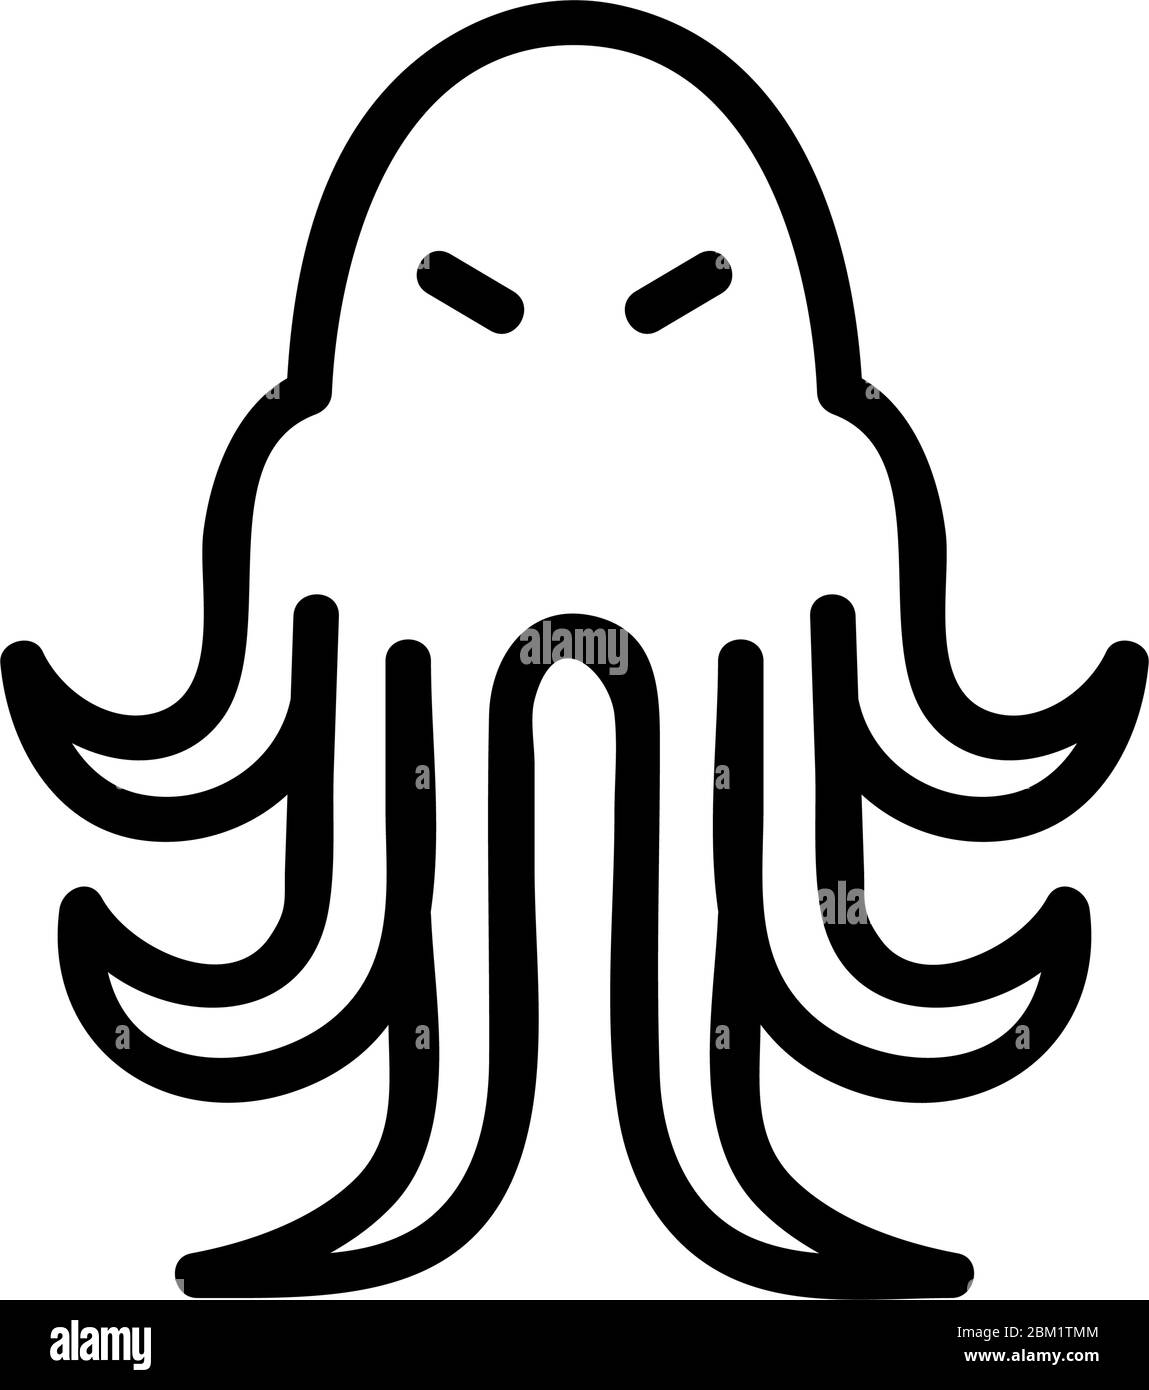 https://c8.alamy.com/comp/2BM1TMM/angry-squid-with-long-tentacles-icon-vector-outline-illustration-2BM1TMM.jpg